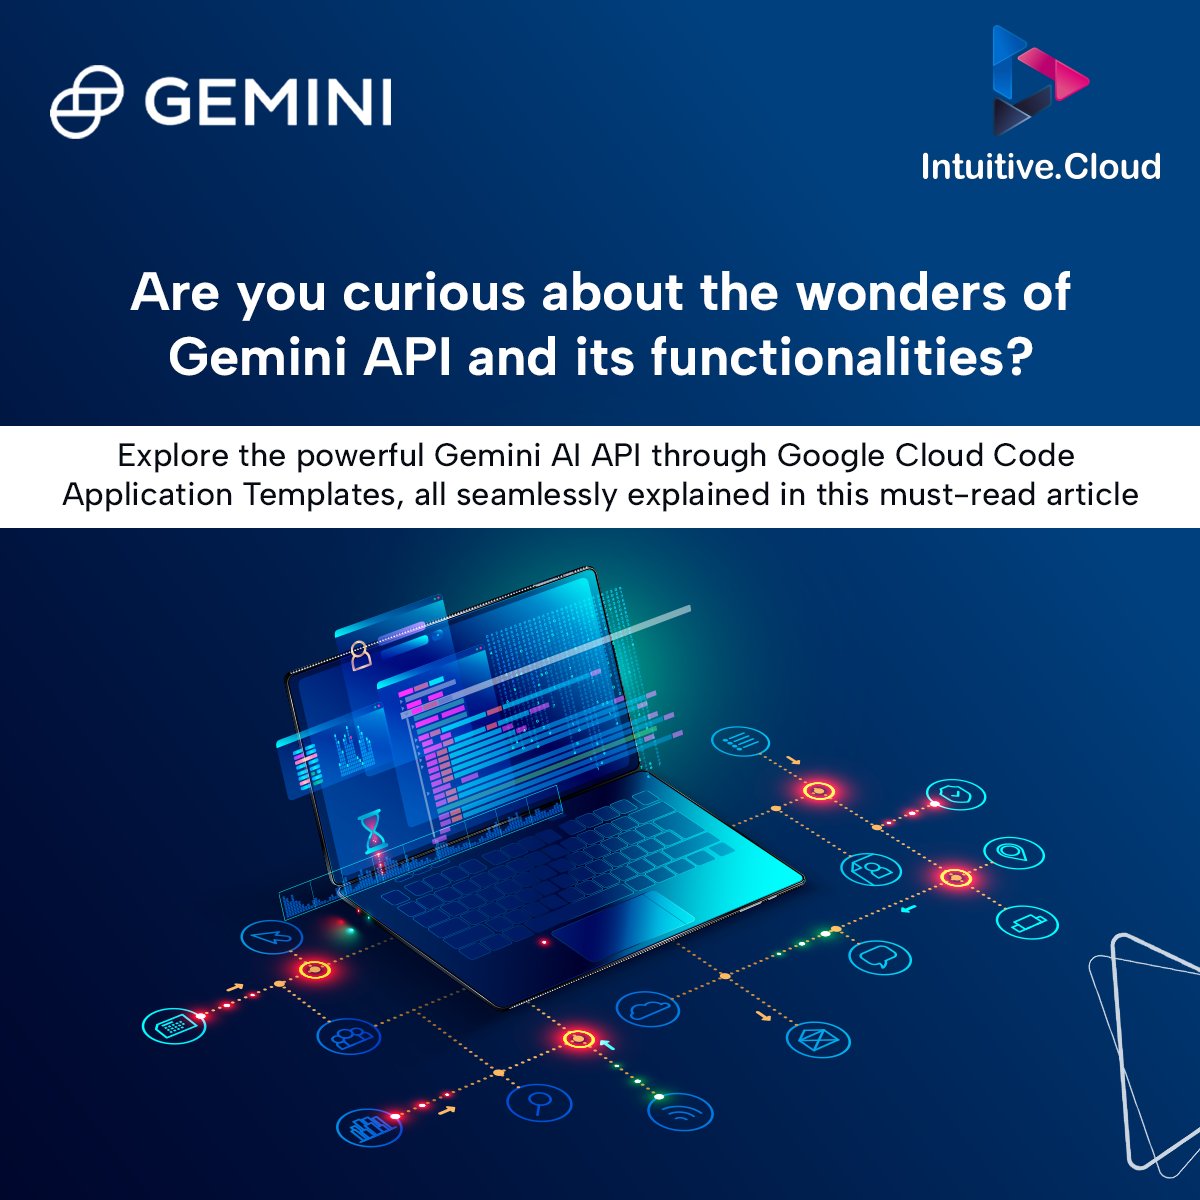 Ever wondered how to tap into the boundless potential of #GeminiAPI? Look no further! This comprehensive article unlocks the wonders of this powerful #API, seamlessly integrated with #GoogleCloud through ingenious Code Application Templates – bit.ly/3SejKRN

#Intuitive